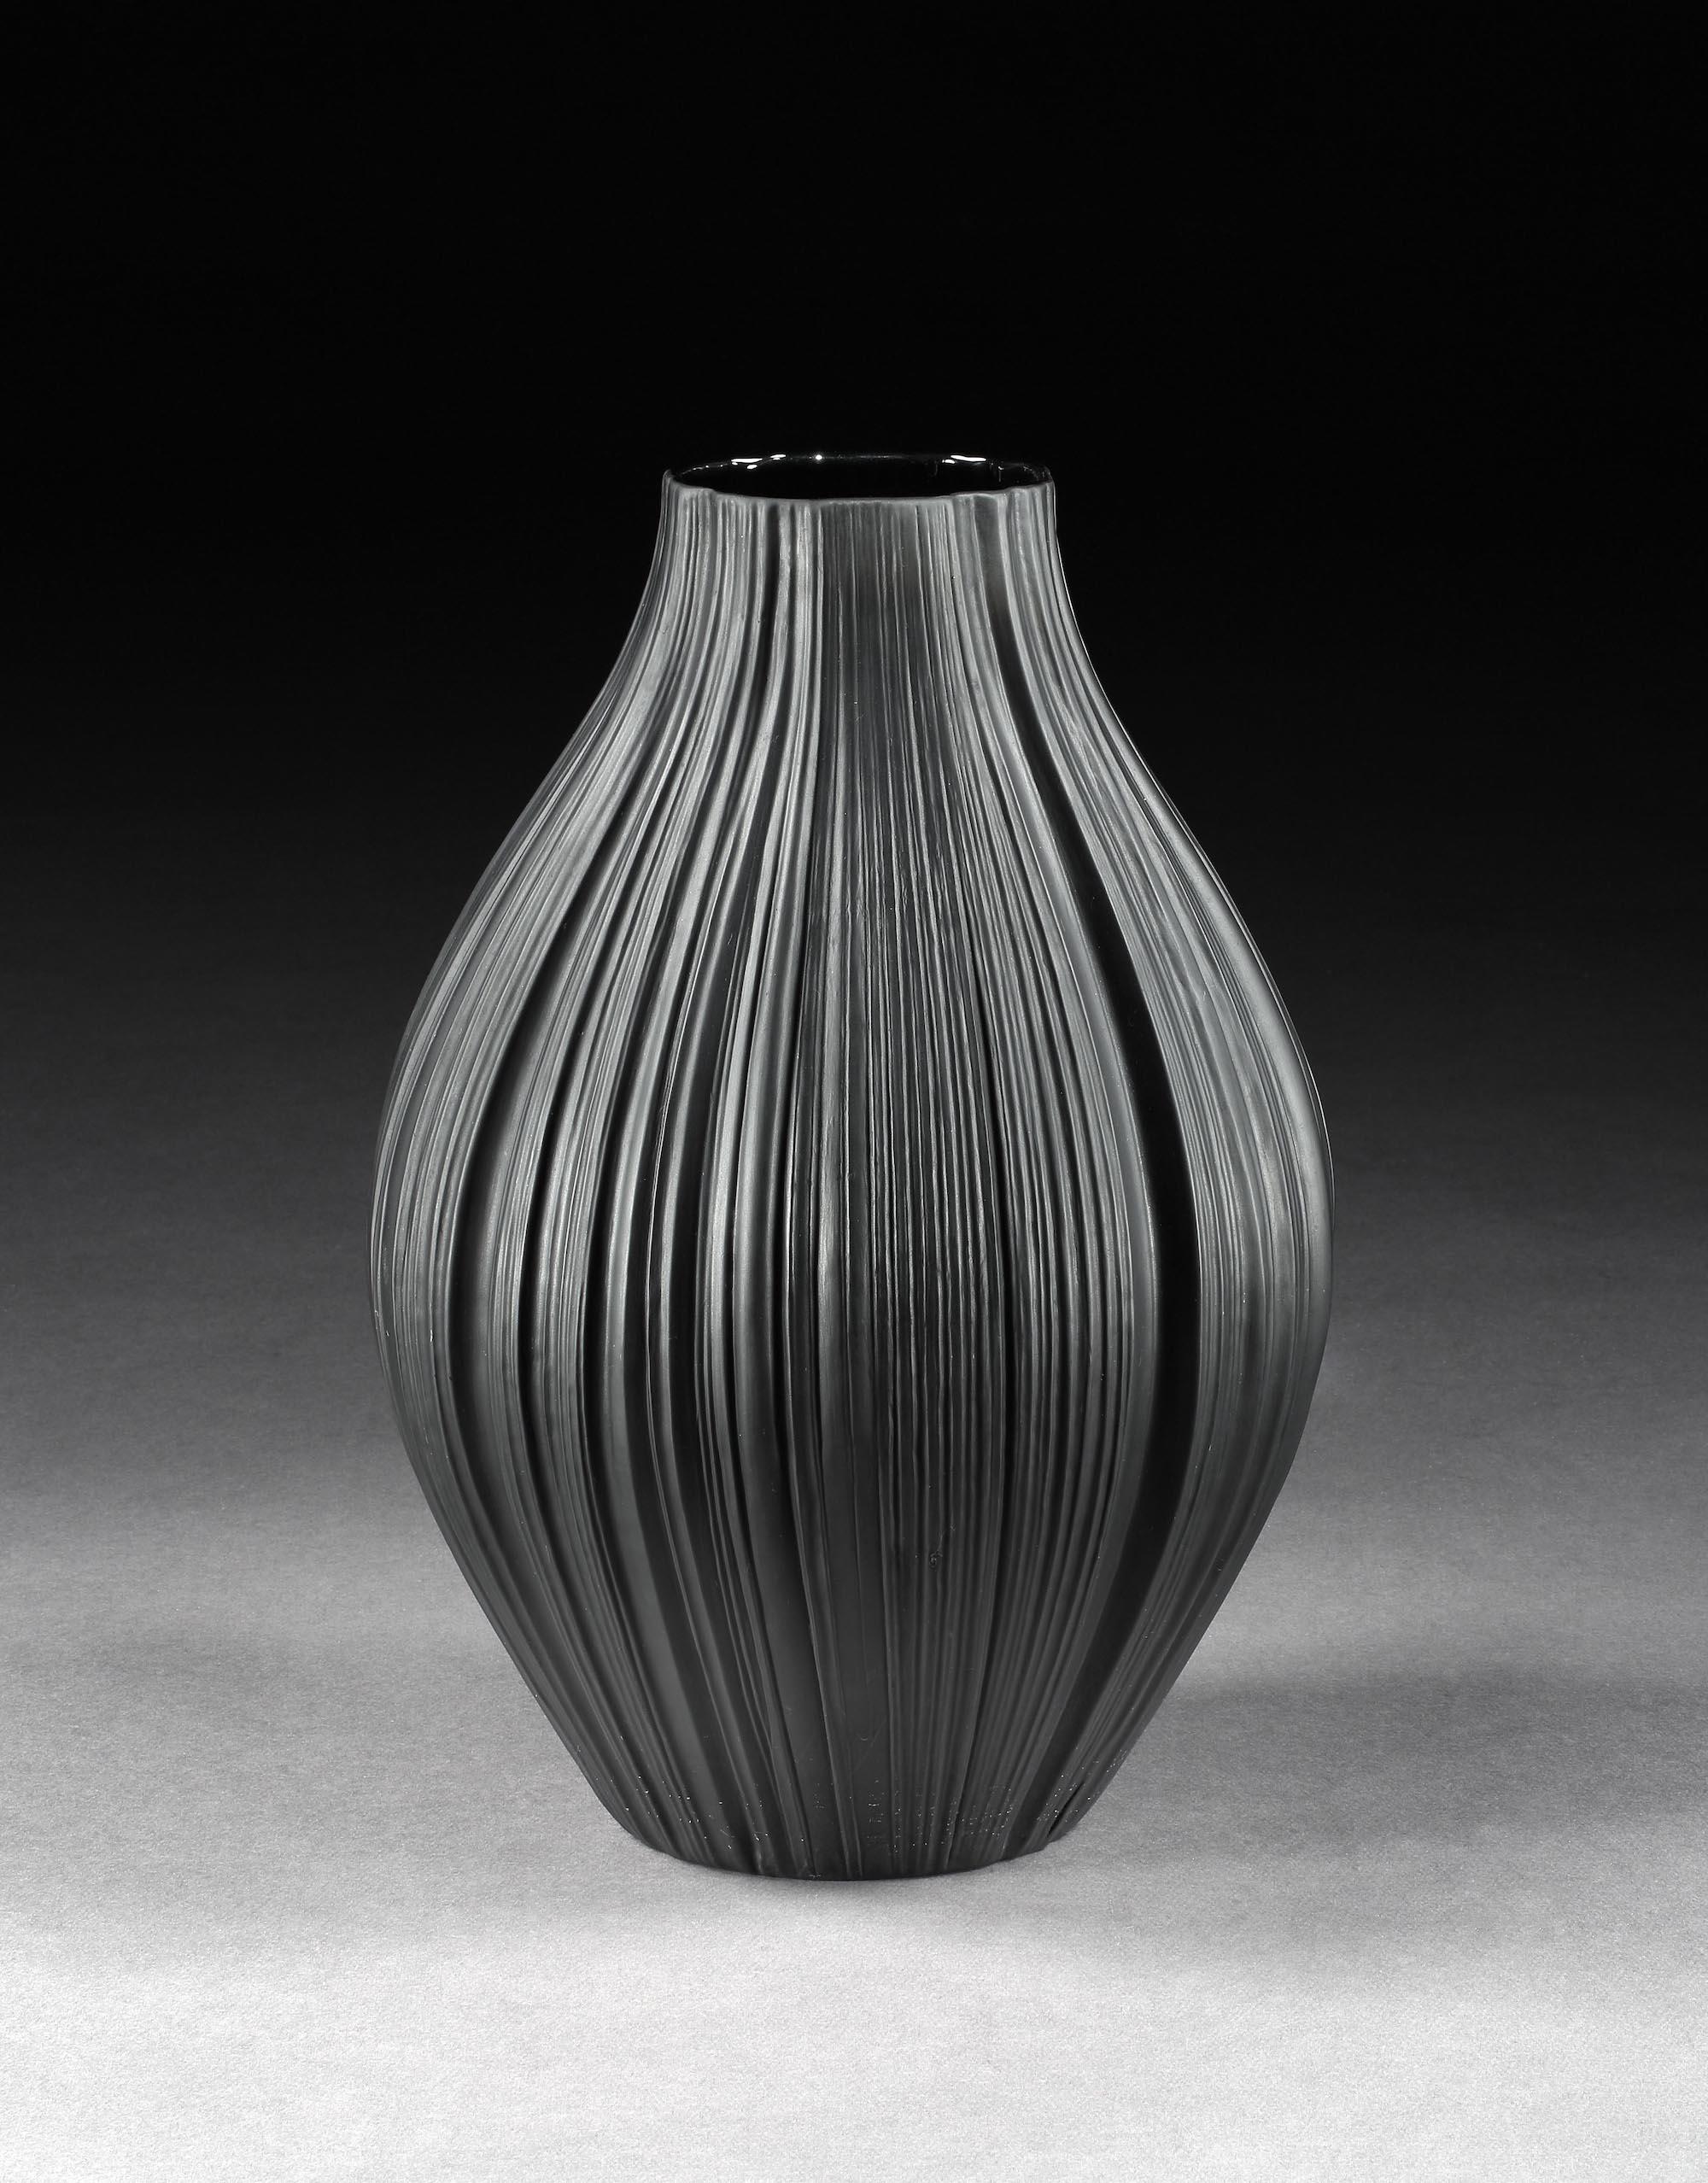 Martin Freyer for Rosenthal Studio: Massive, black, porcelain, pleated or plissee vase, 1968

- The pleated vase is known as Martin Freyer’s best work working with the ancient theme of drapery in art
Freyer worked as a portrait artist as well as